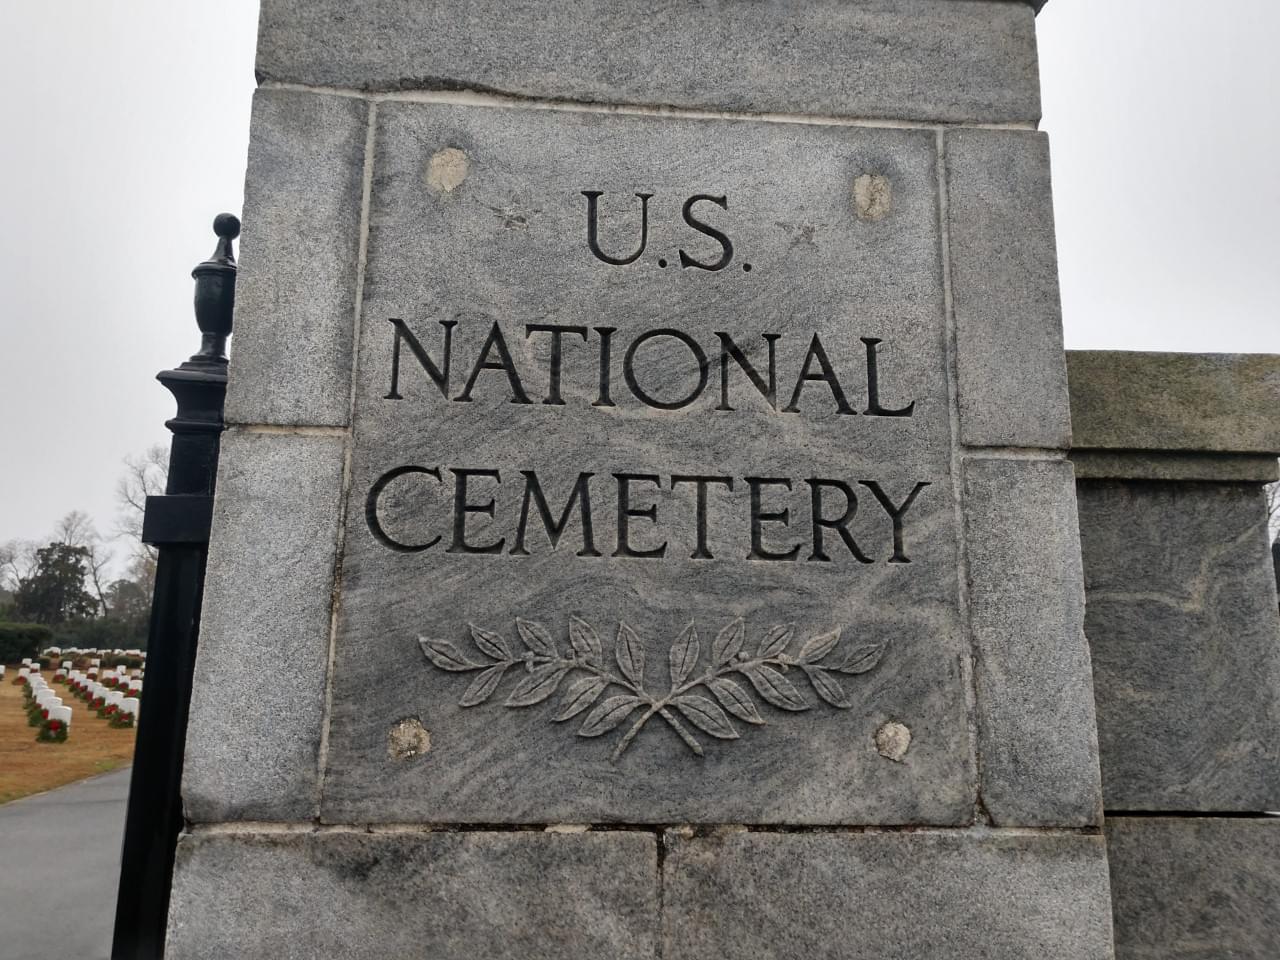 WSFL Visits the New Bern National Cemetary